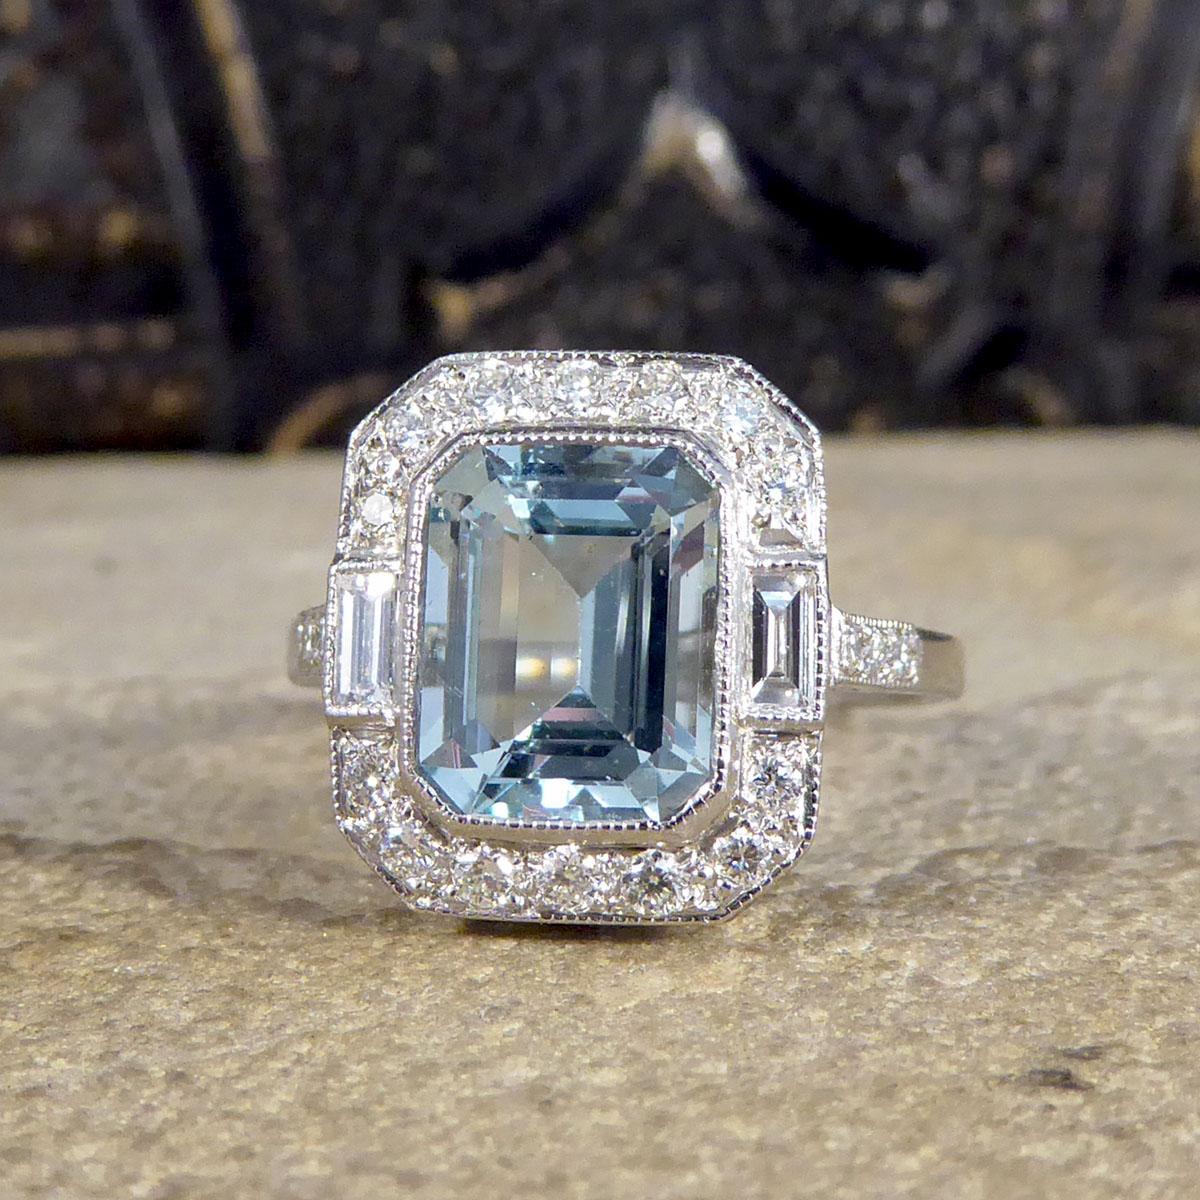 Women's or Men's Contemporary Art Deco Style 2.10ct Aquamarine and Diamond Cluster Ring in Plat